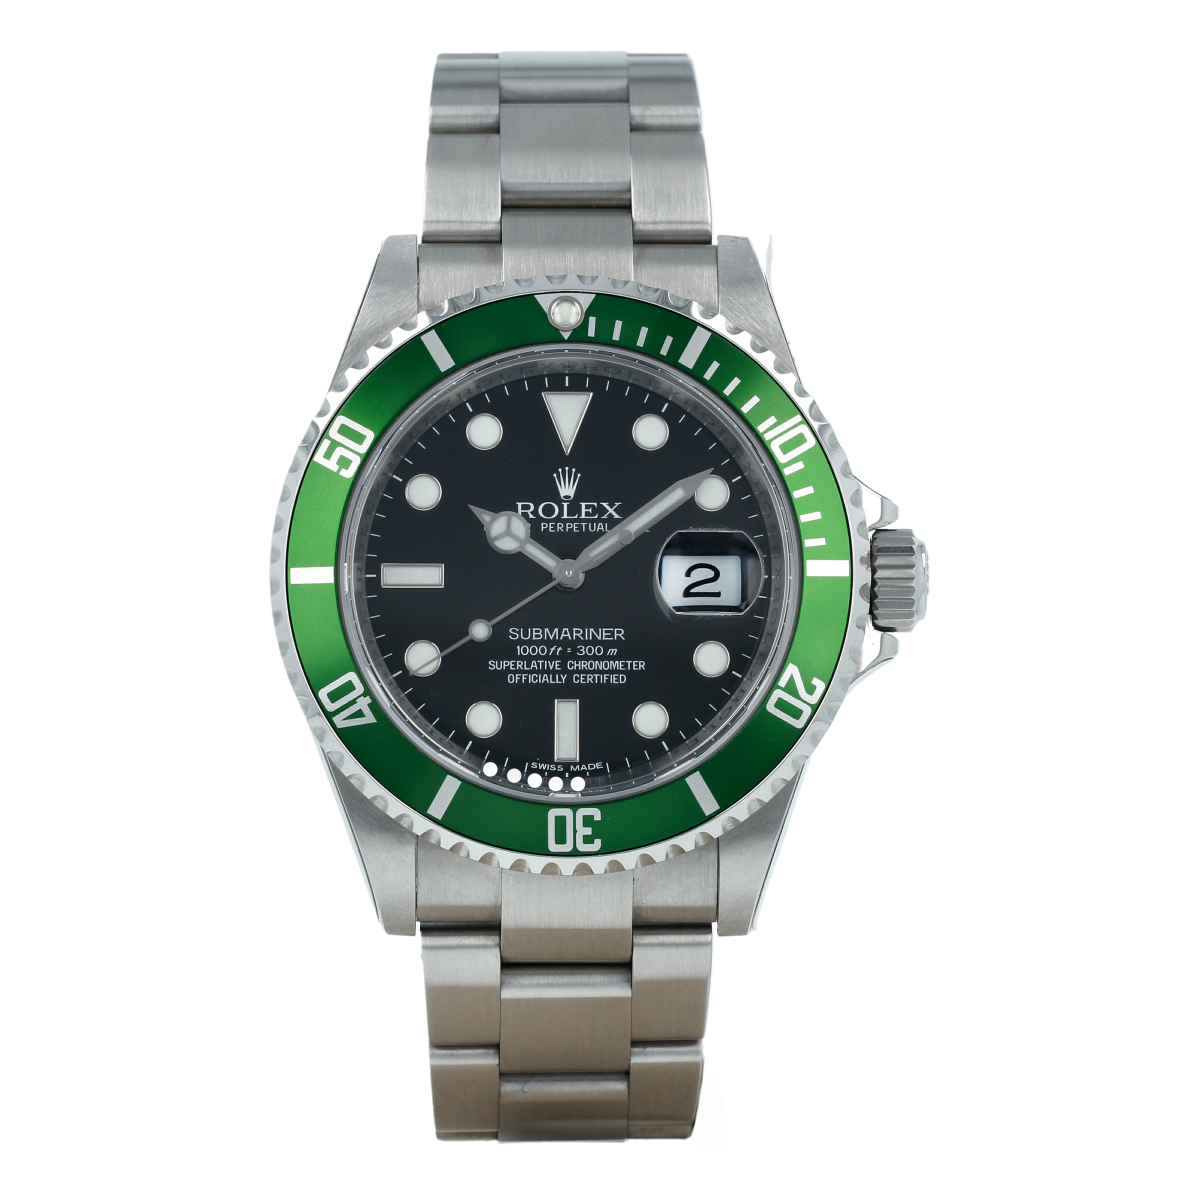 Rolex Submariner Date 16610LV “Kermit *NOS with Stickers* (2018) | Buy pre-owned Rolex watch